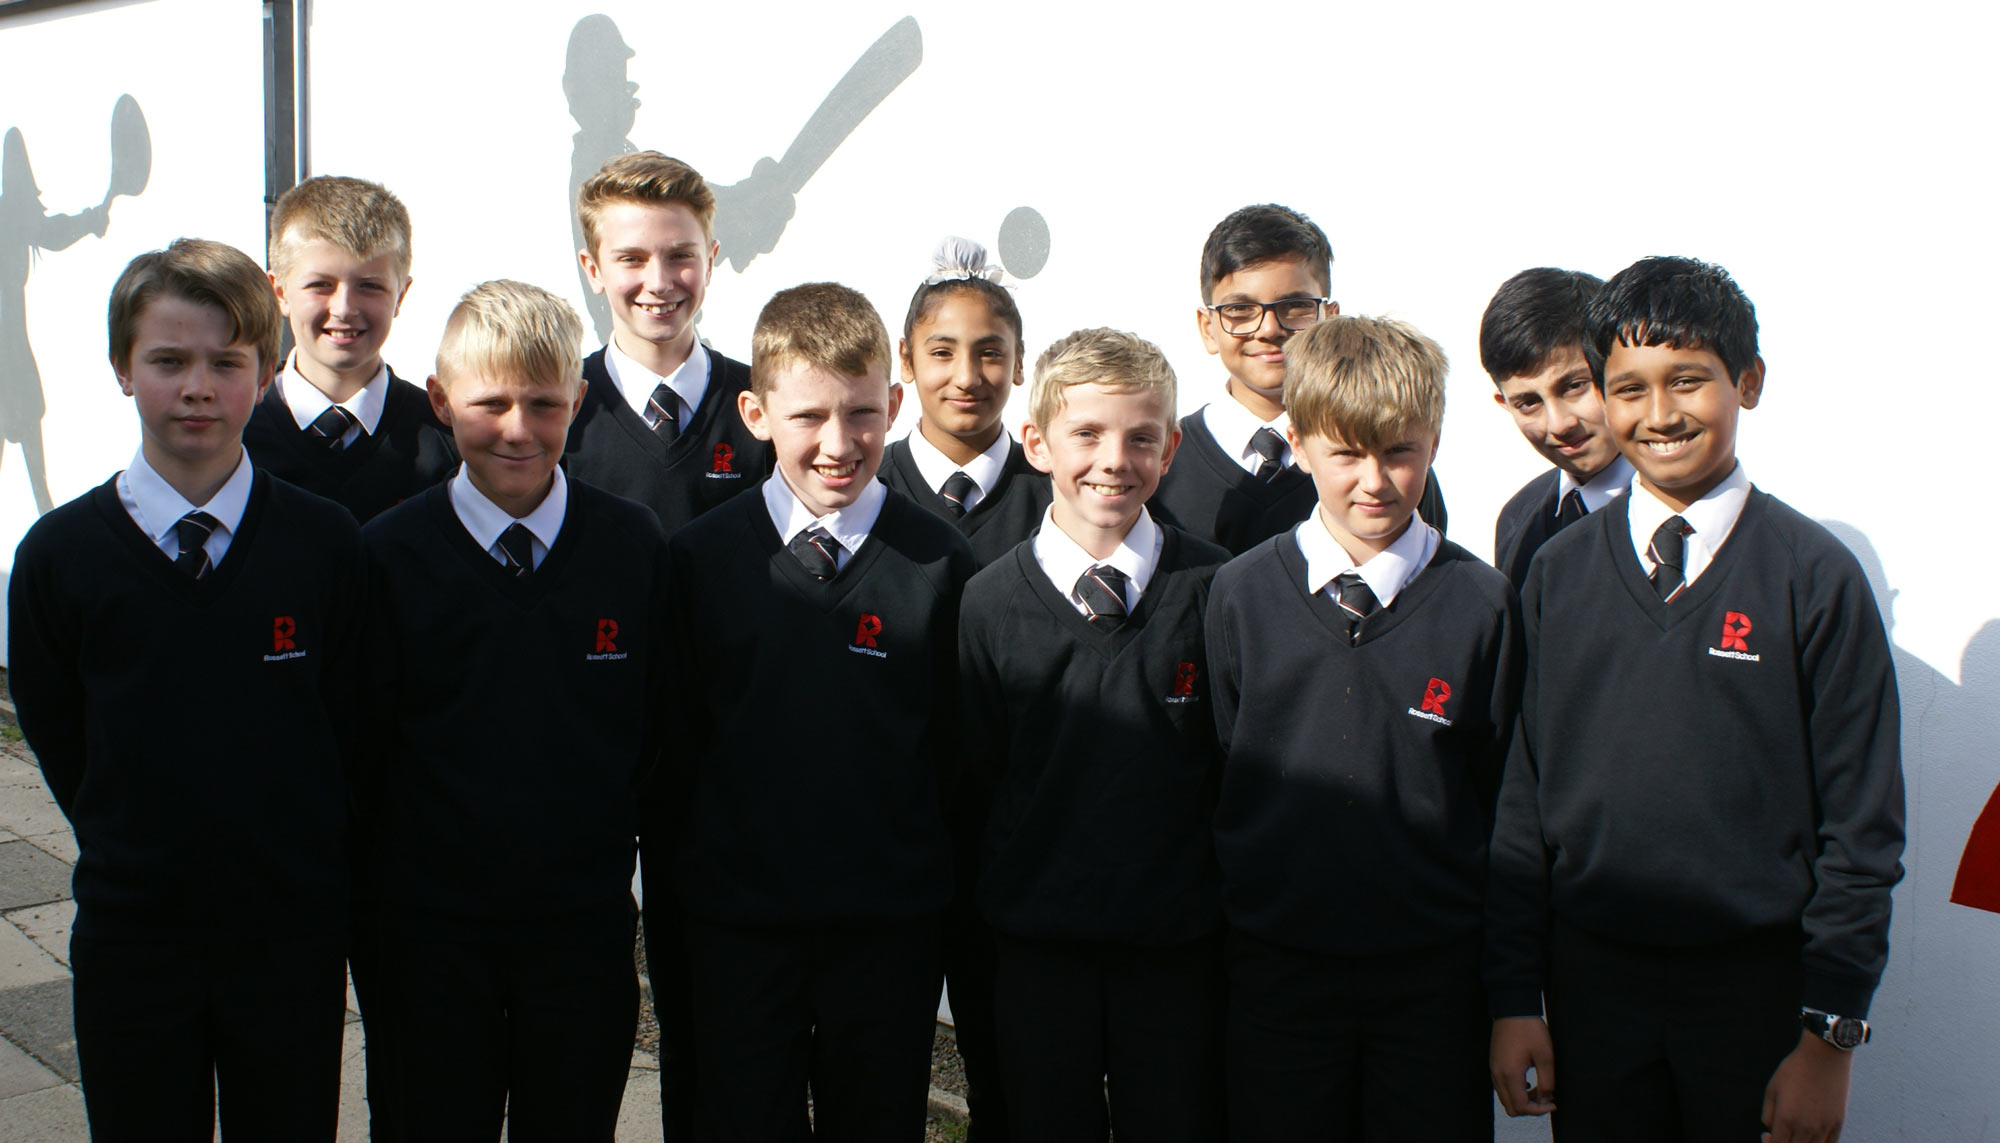 Rossett School’s cricketers won the Dennis Richards Trophy, setting the school up for another successful year